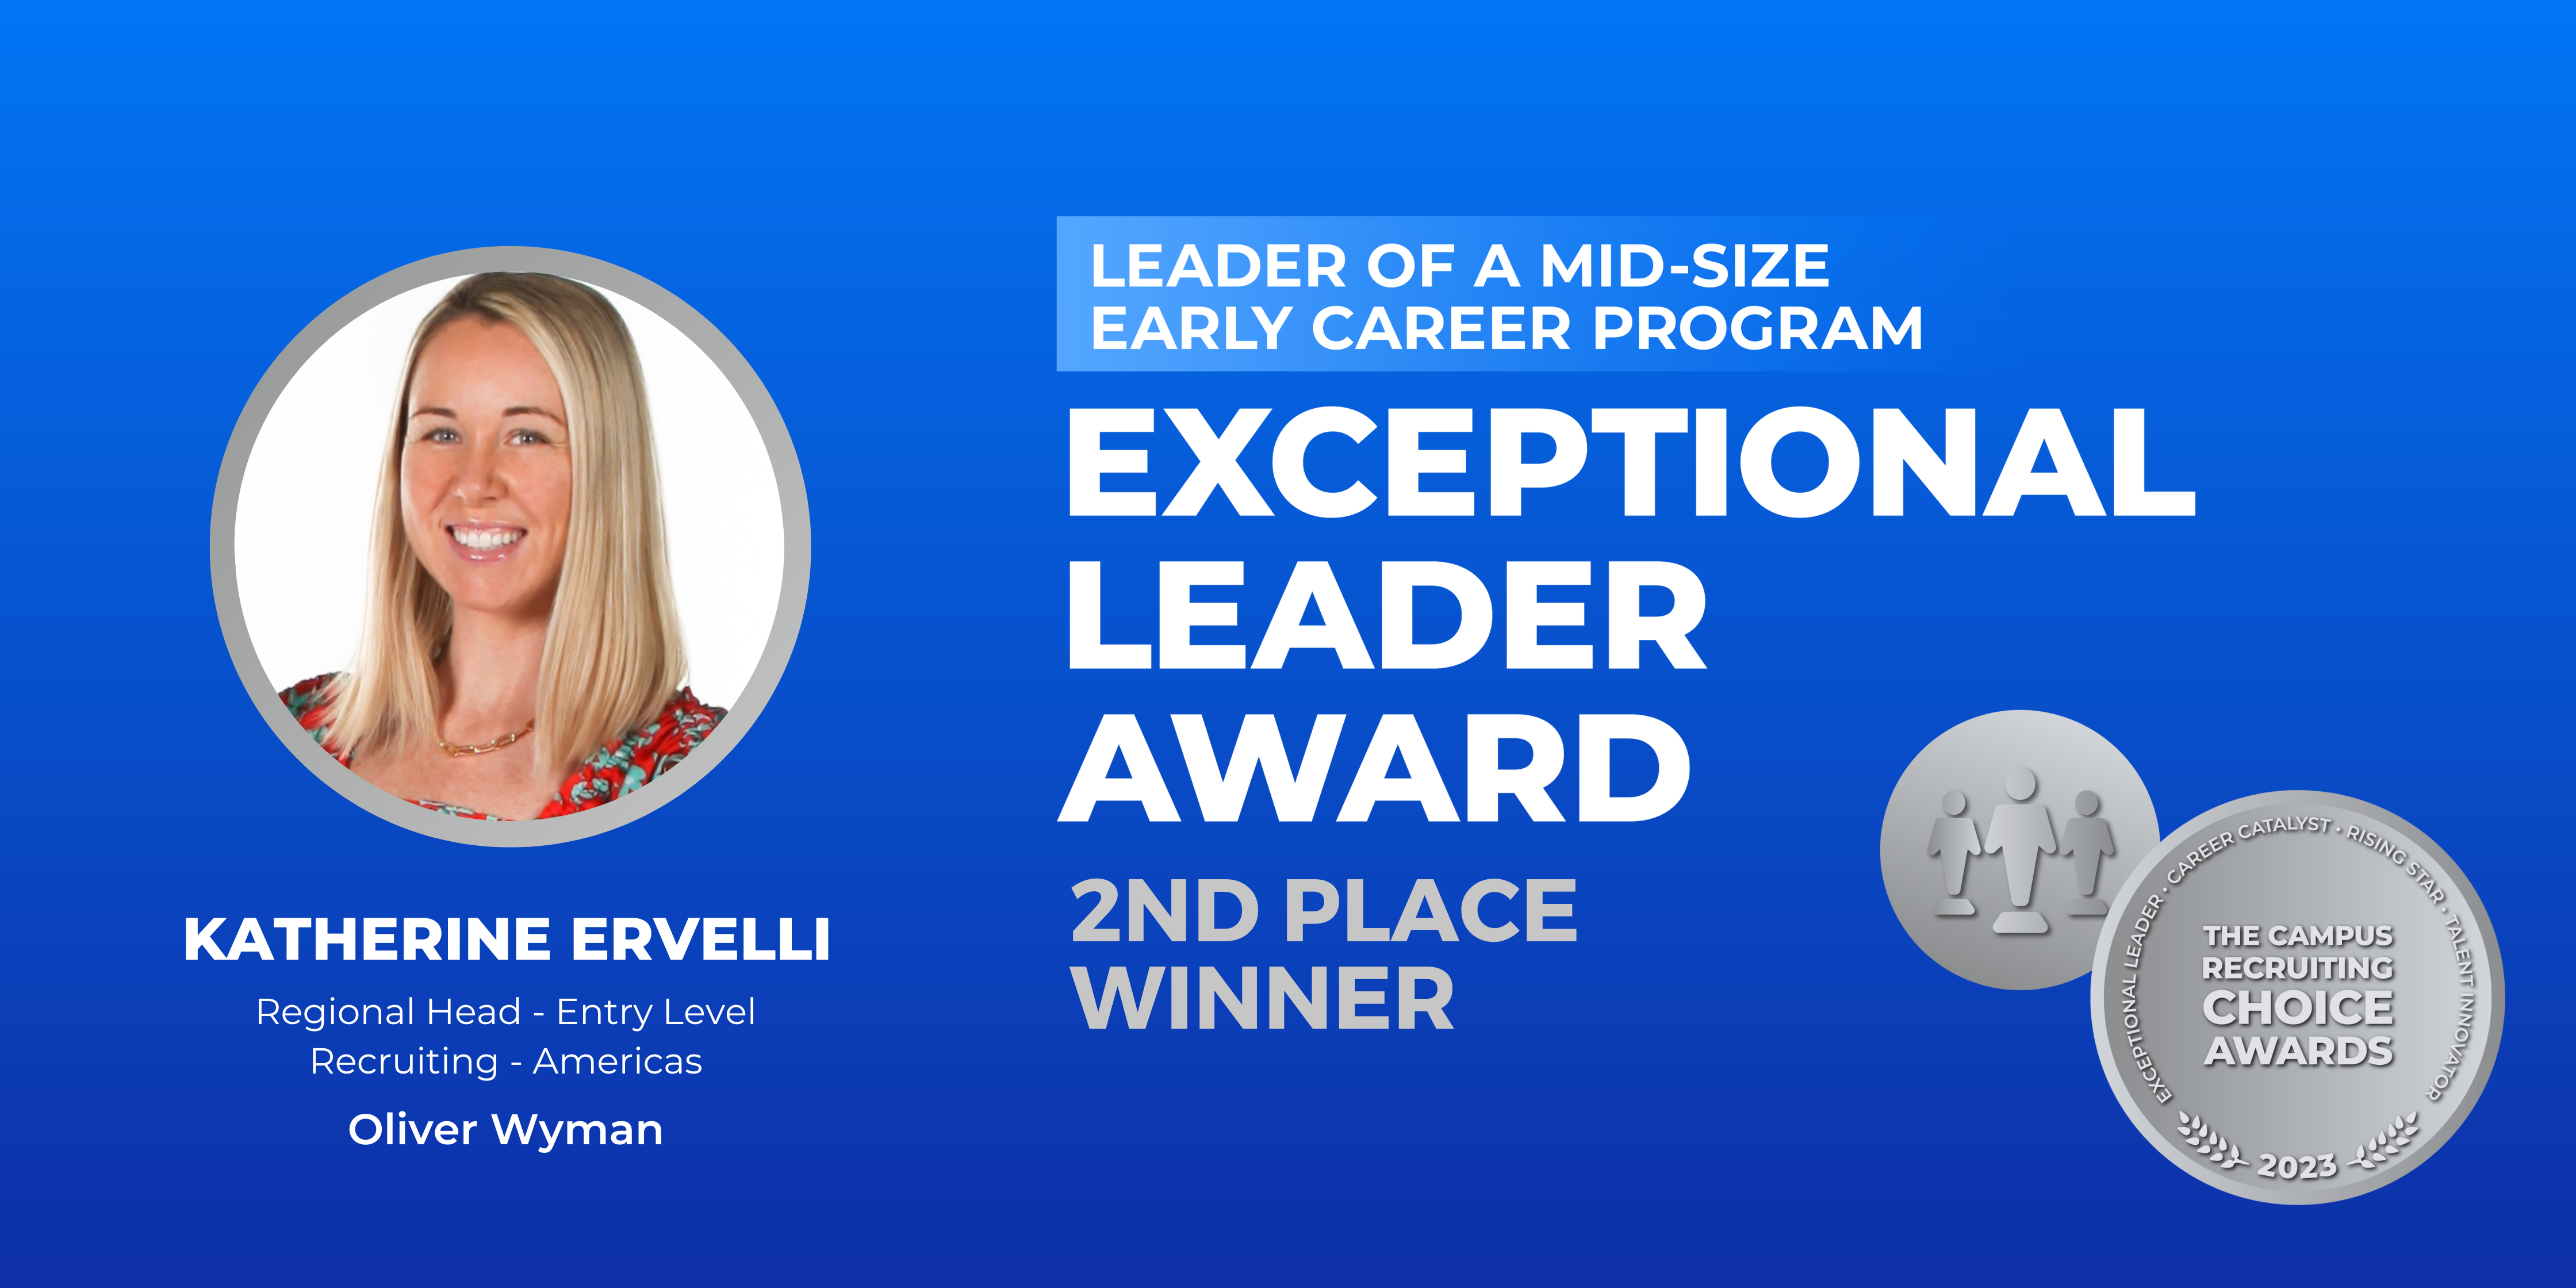 EXCEPTIONAL LEADER - Leader of a Mid-Size Early Career Program - 2nd Place Winner - Katherine Ervelli